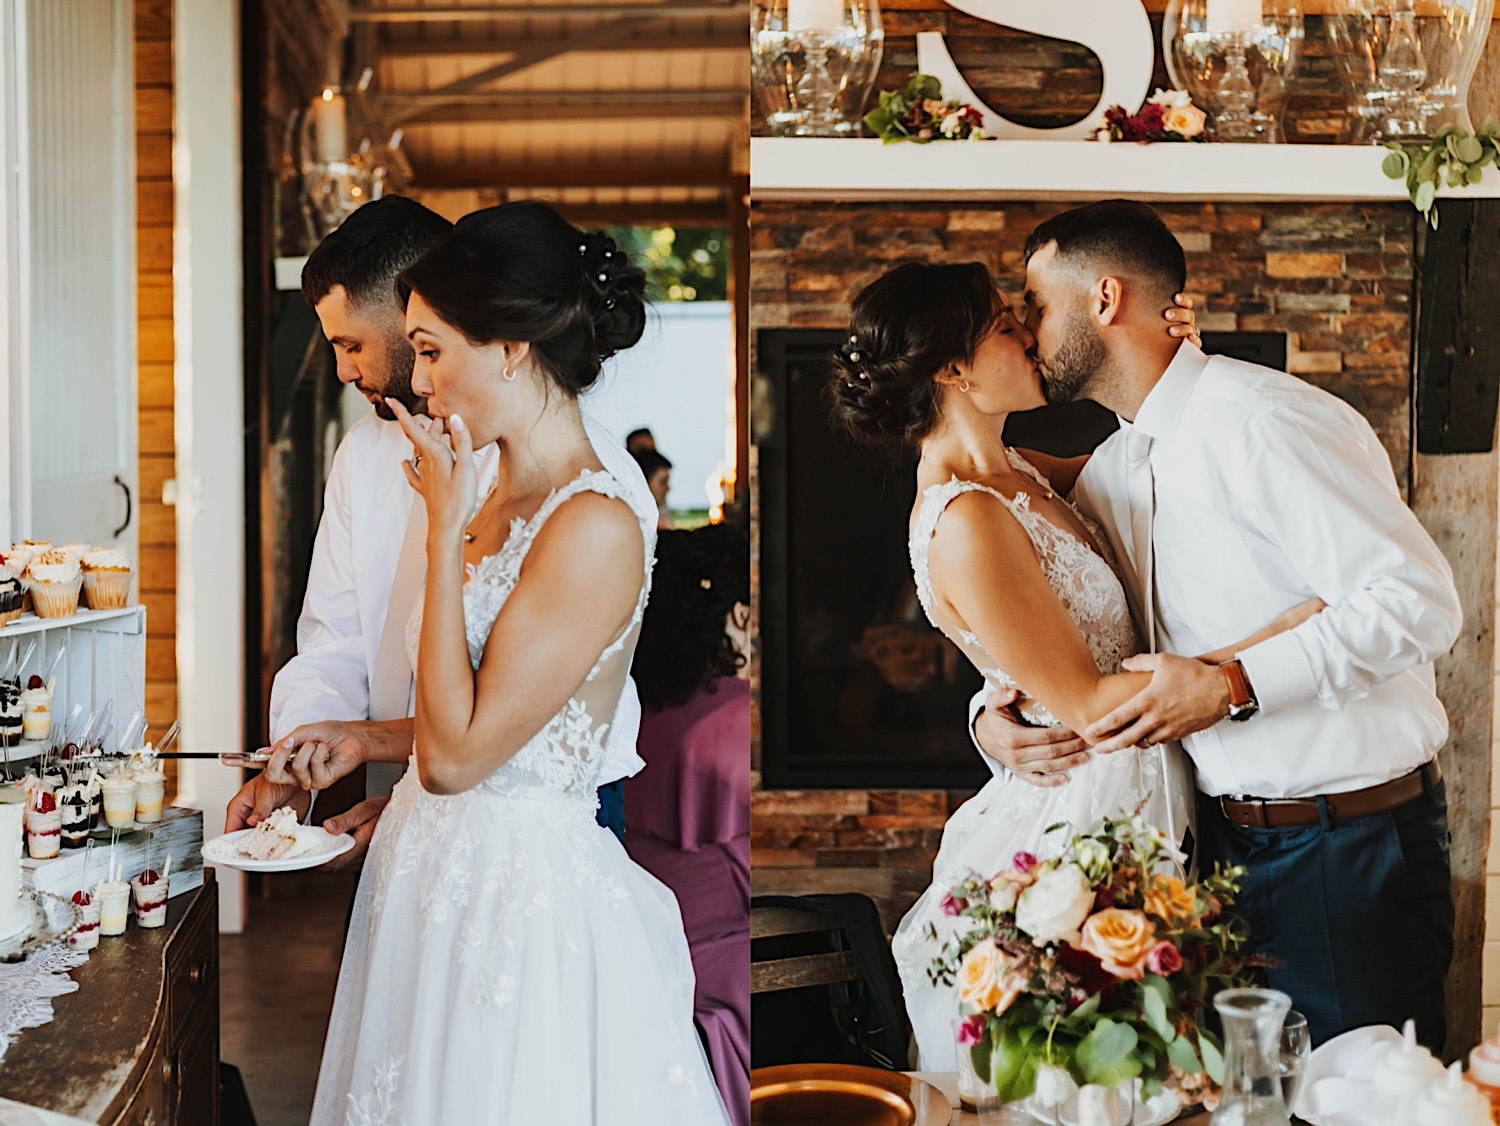 2 photos side by side, the left is of the bride and groom grabbing dessert from the dessert table, the right is of them kissing one another